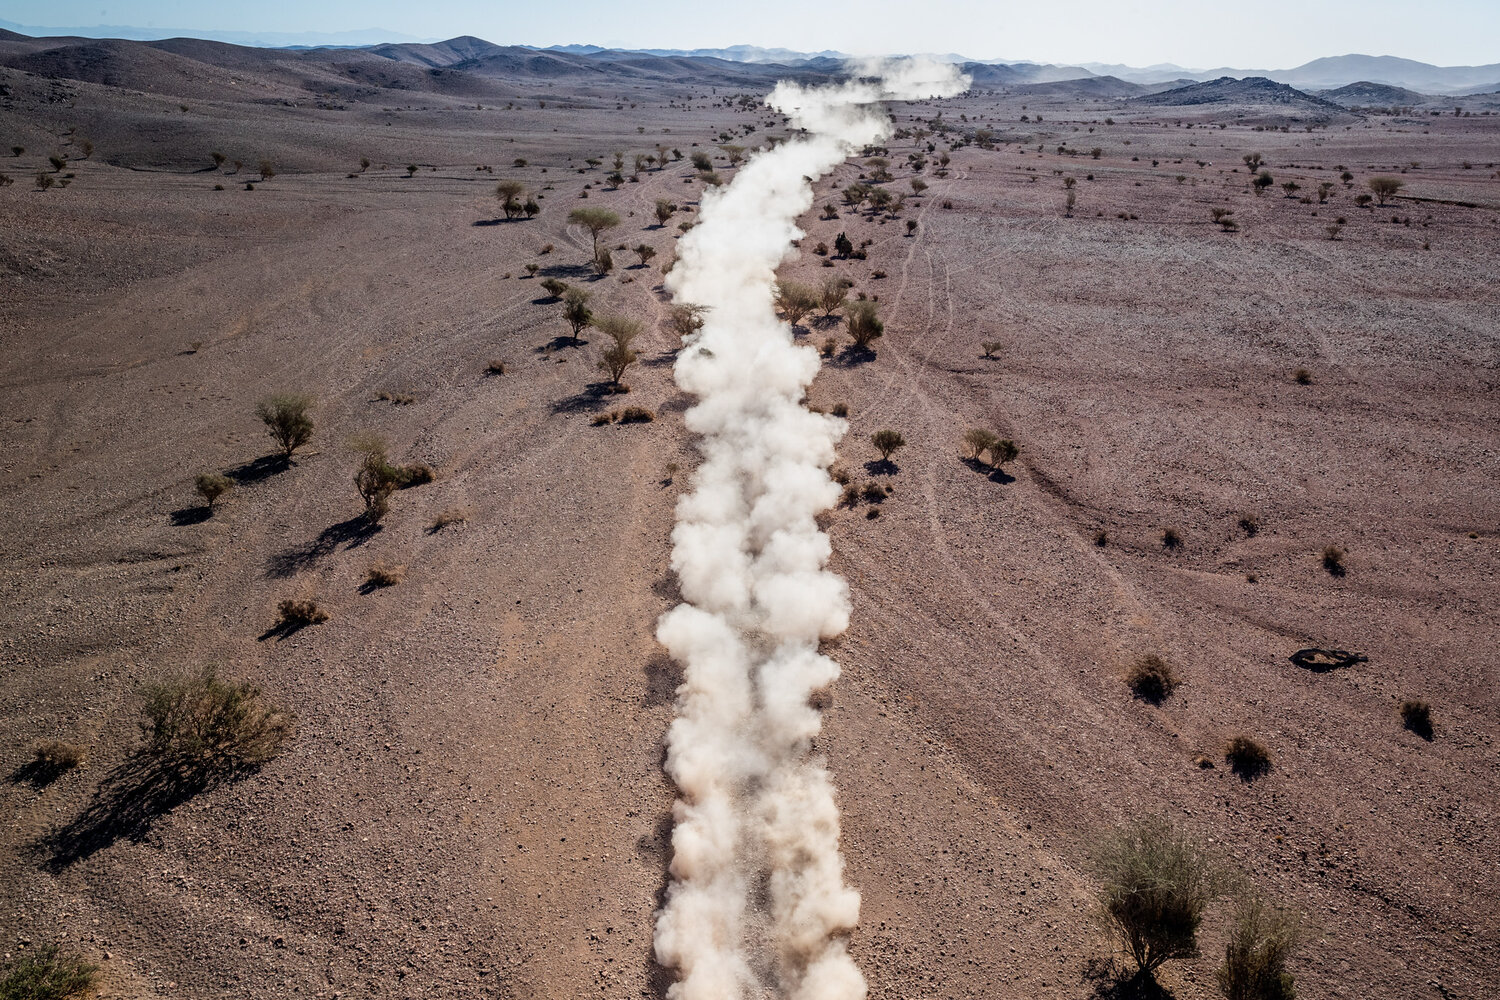  A trail of dust kicked up by a race car rises from the landscape during stage two of the Dakar Rally, between Al Wajh and Neom, Saudi Arabia on Jan. 6, 2020. (AP Photo/Bernat Armangue) 